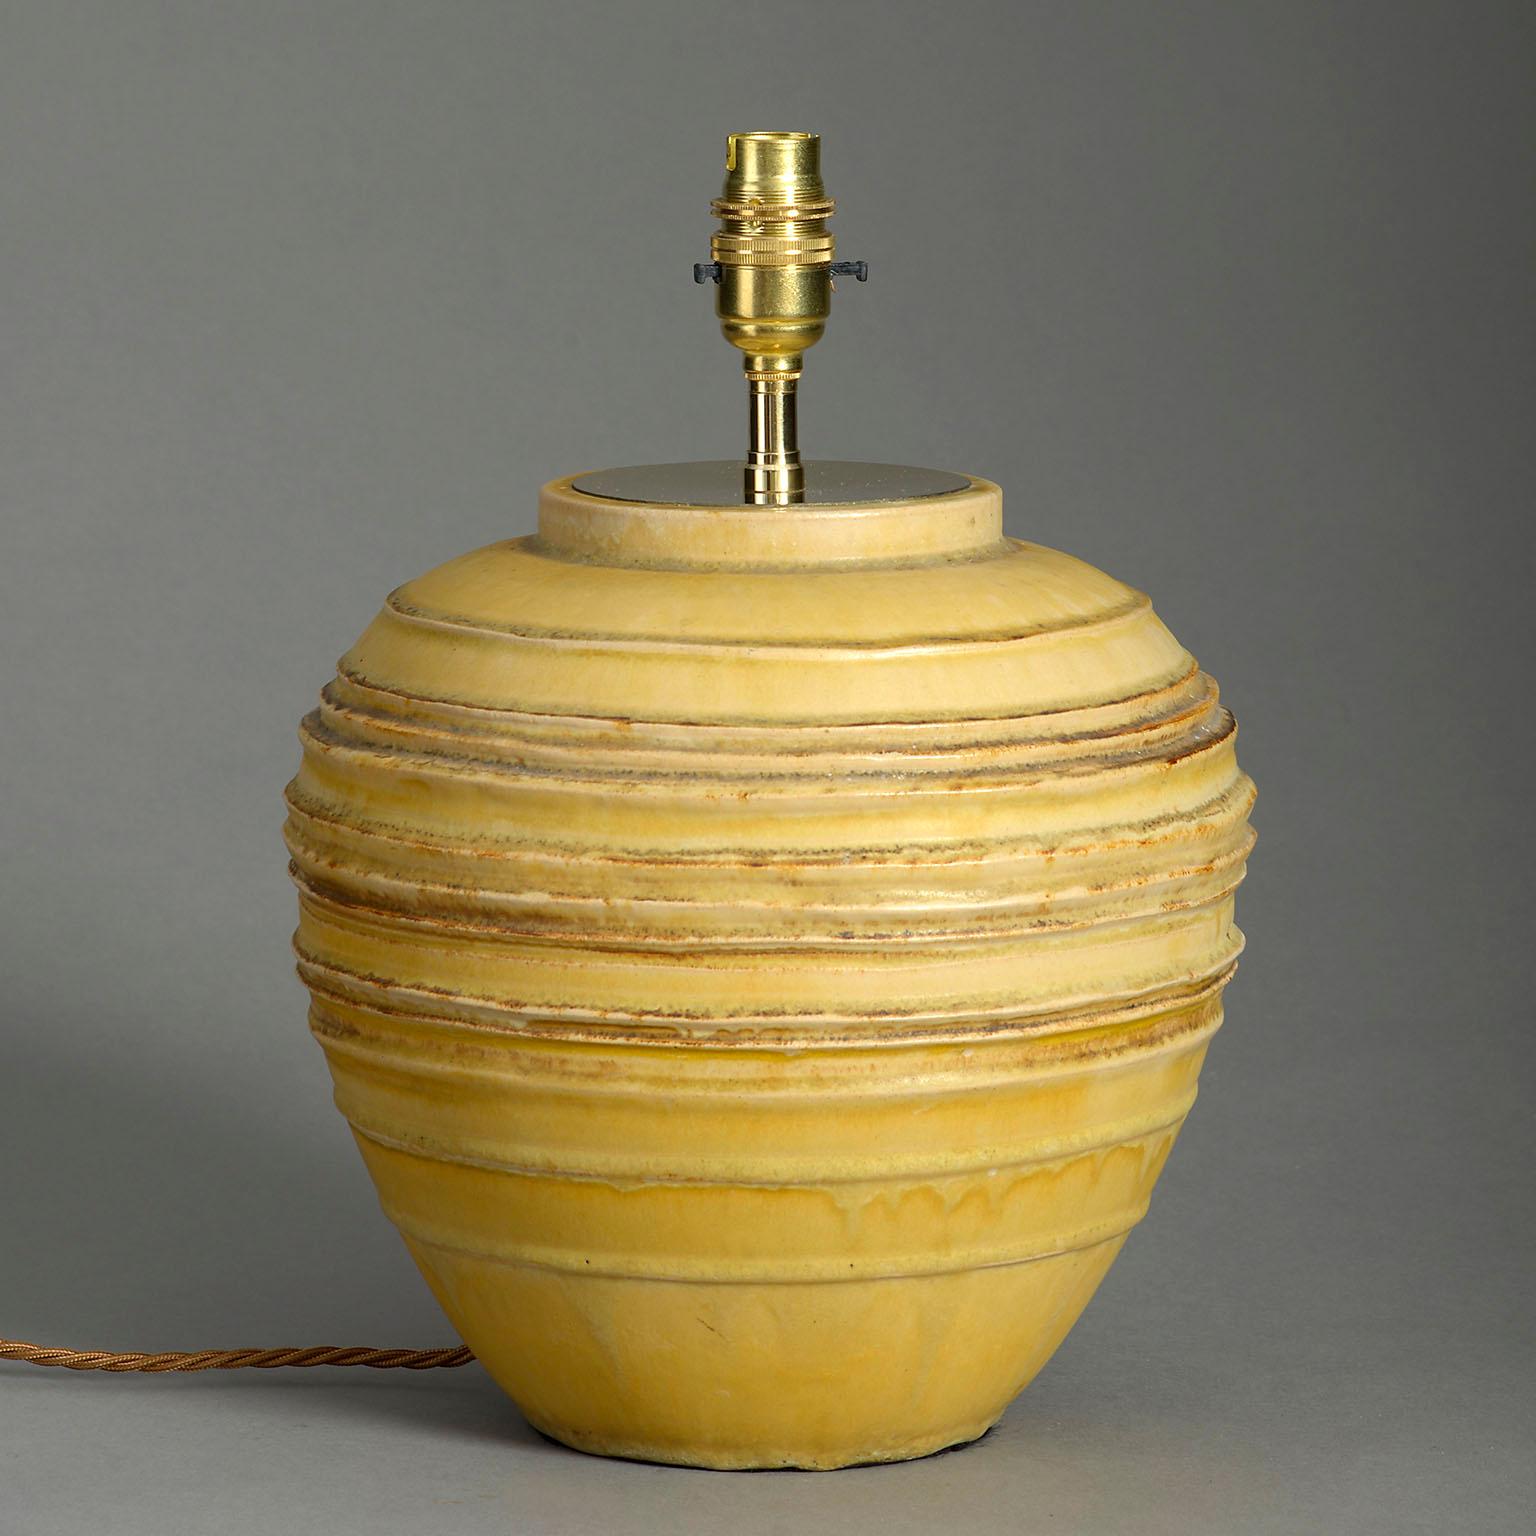 A mid-twentieth century studio pottery vase, the bulbous body with thrown ringlets and an ochre glaze. Now mounted as a table lamp.

Dimensions refer to ceramic elements.

Display shade not included.